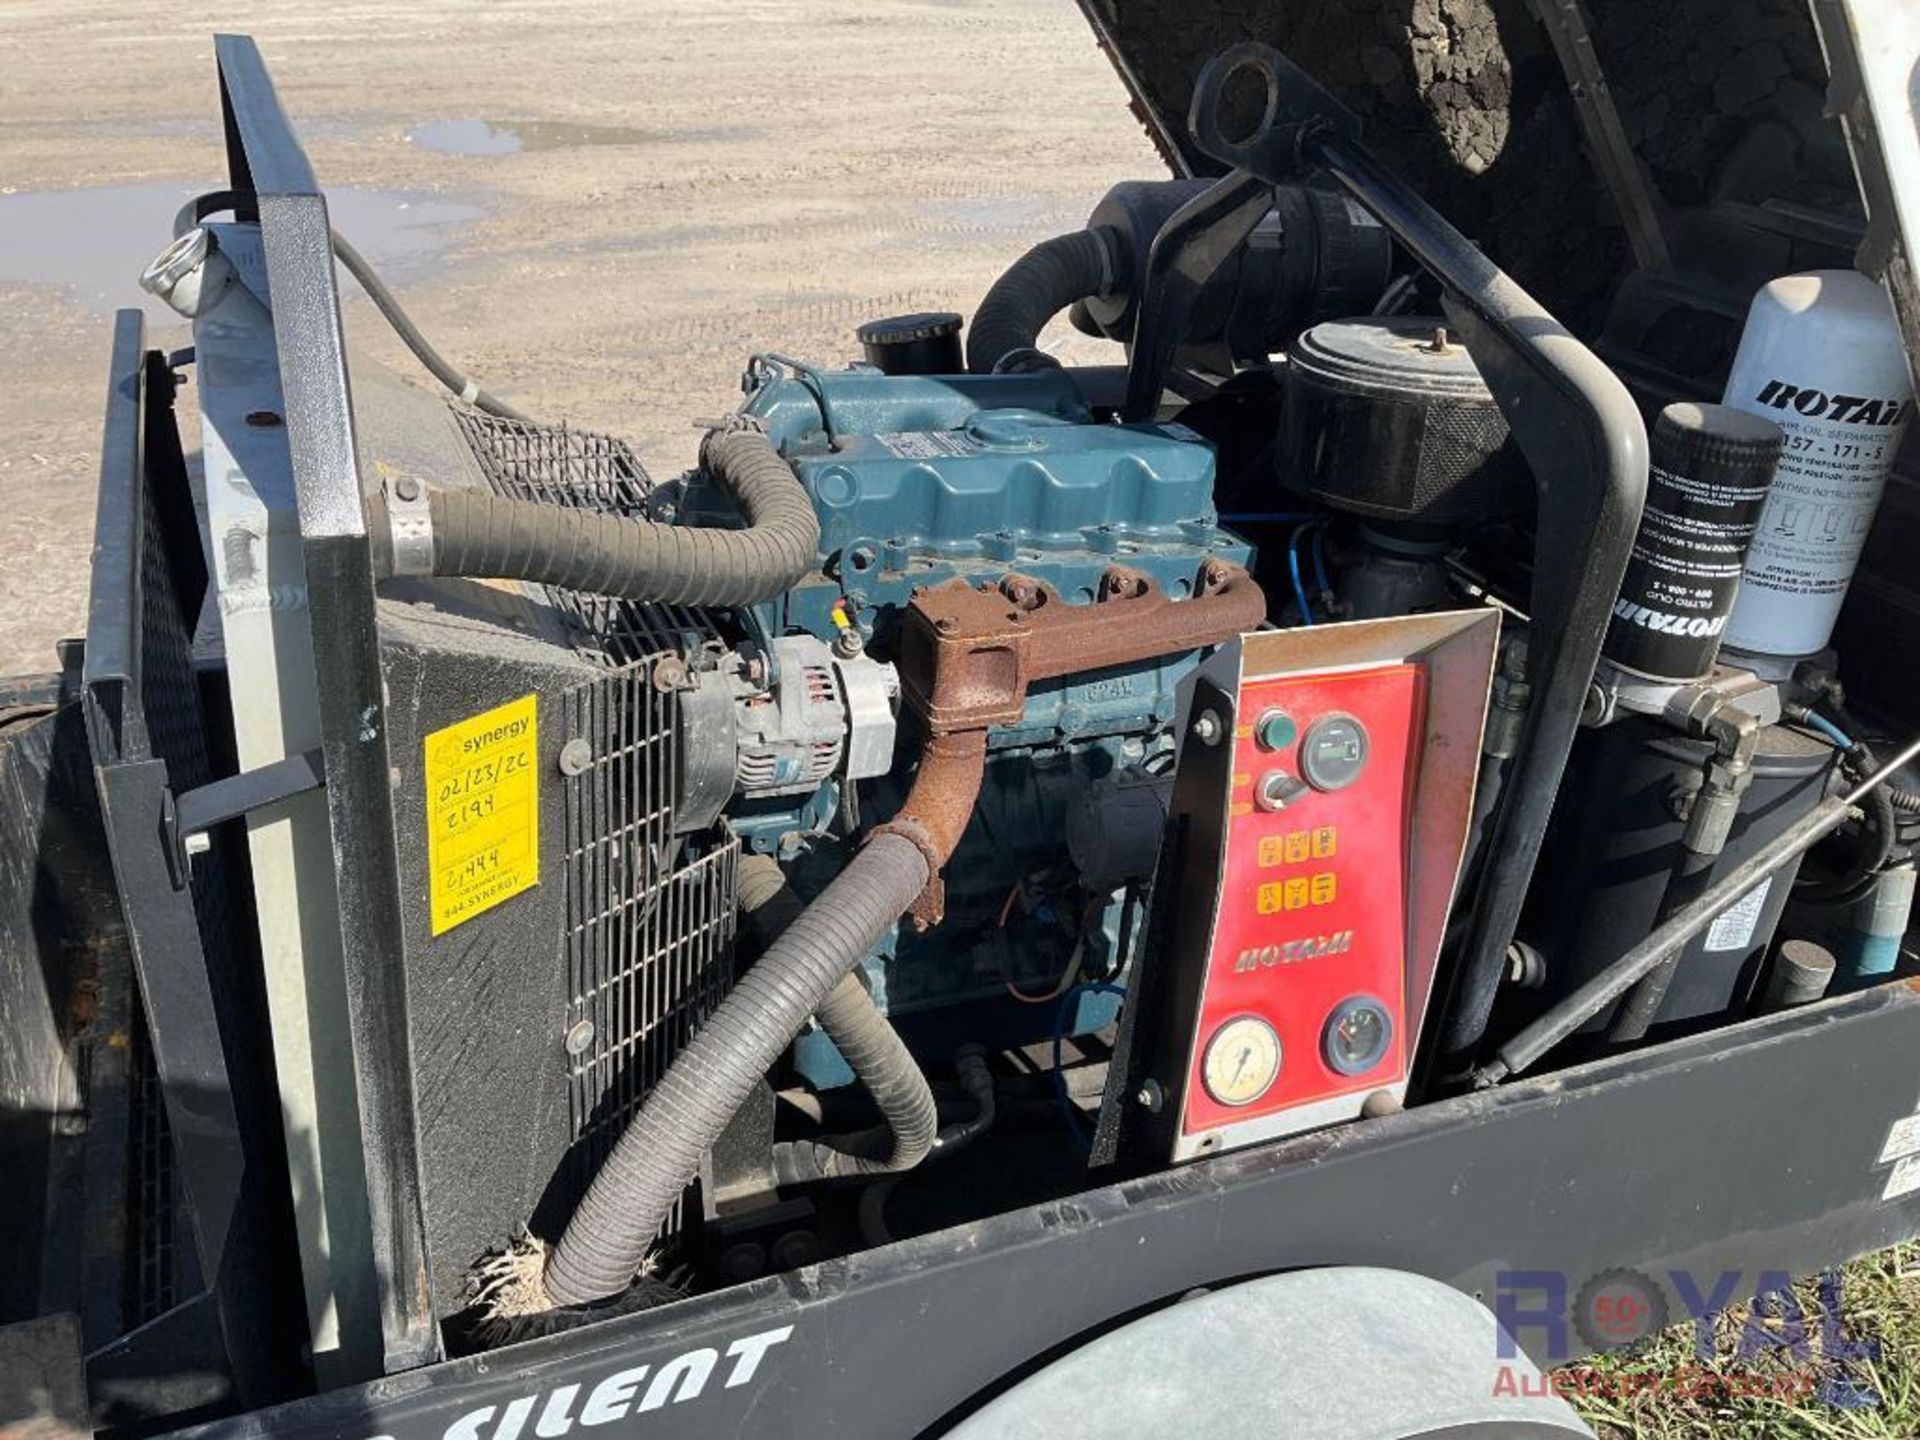 Rotair D185 T41 Towable Air Compressor - Image 7 of 11